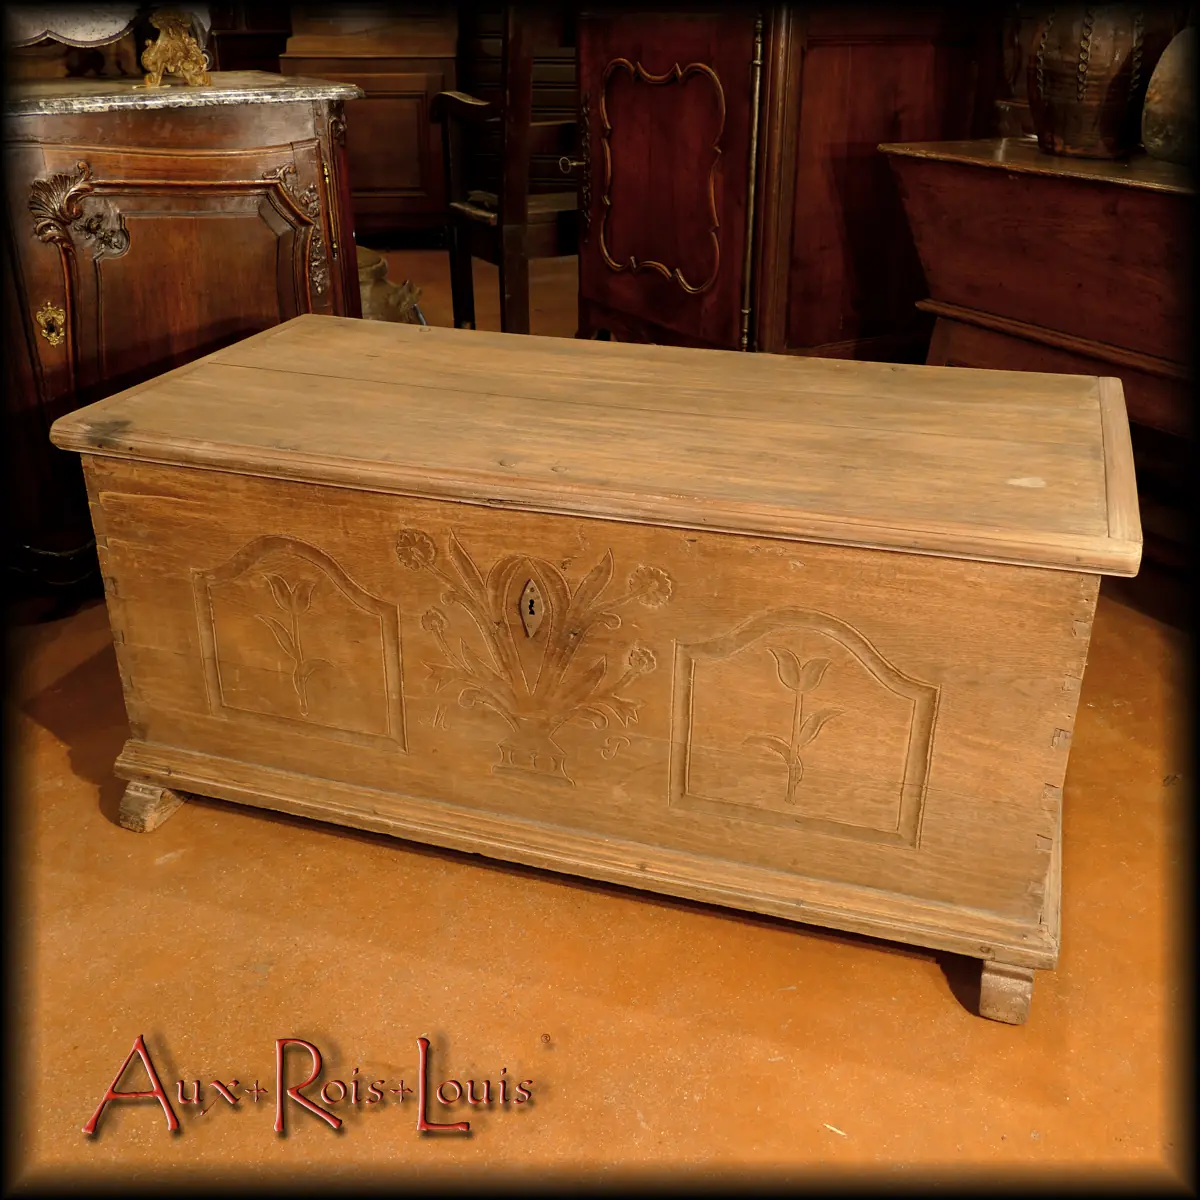 A rather uncommon finish for its time, the 18th century, this end-of-bed chest was simply protected with a beeswax patina, which has allowed its original light oak shade to be preserved.